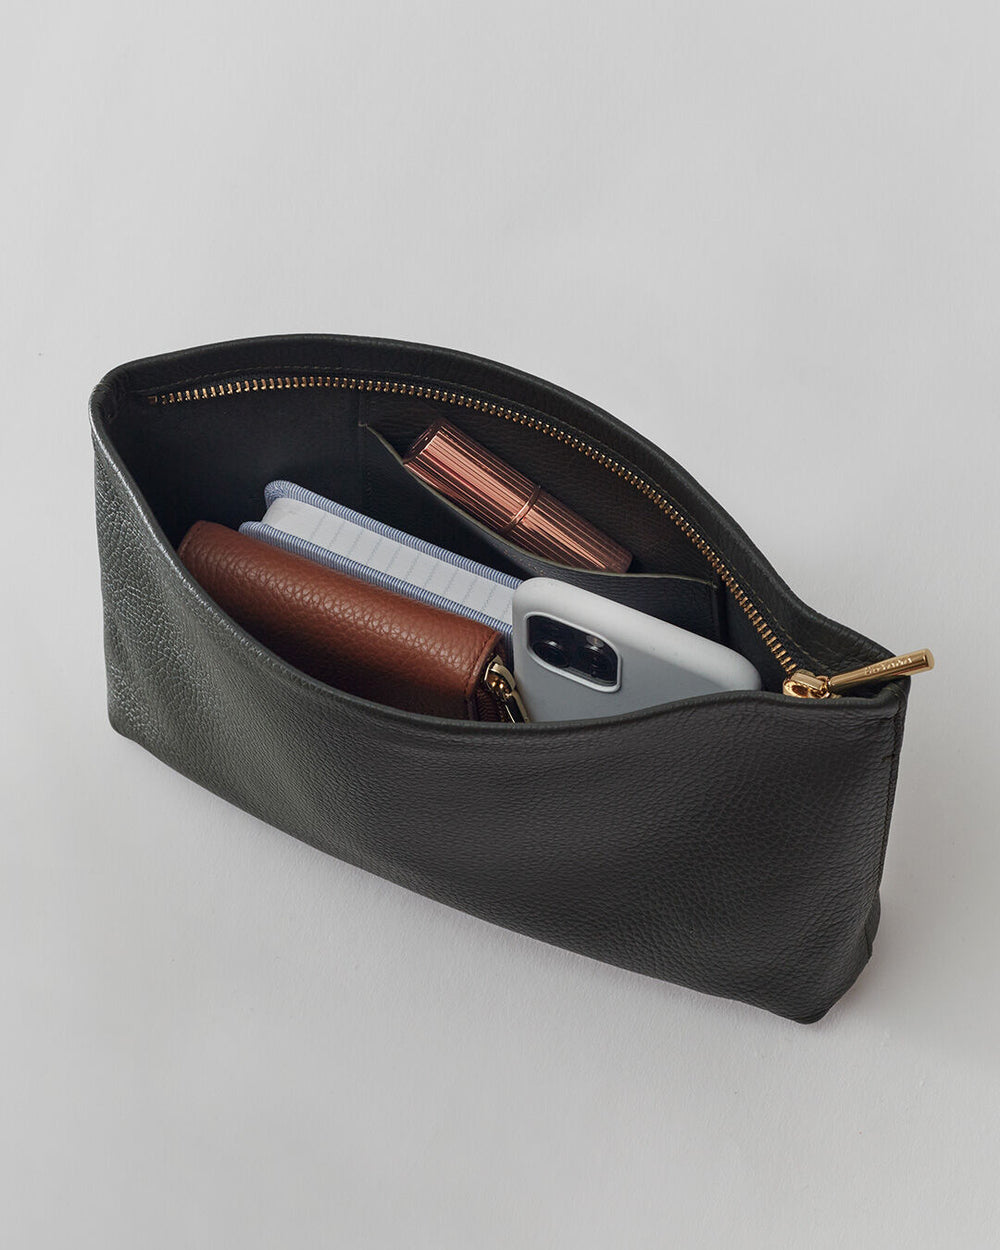 Pouch containing a wallet, phone, and cosmetics.